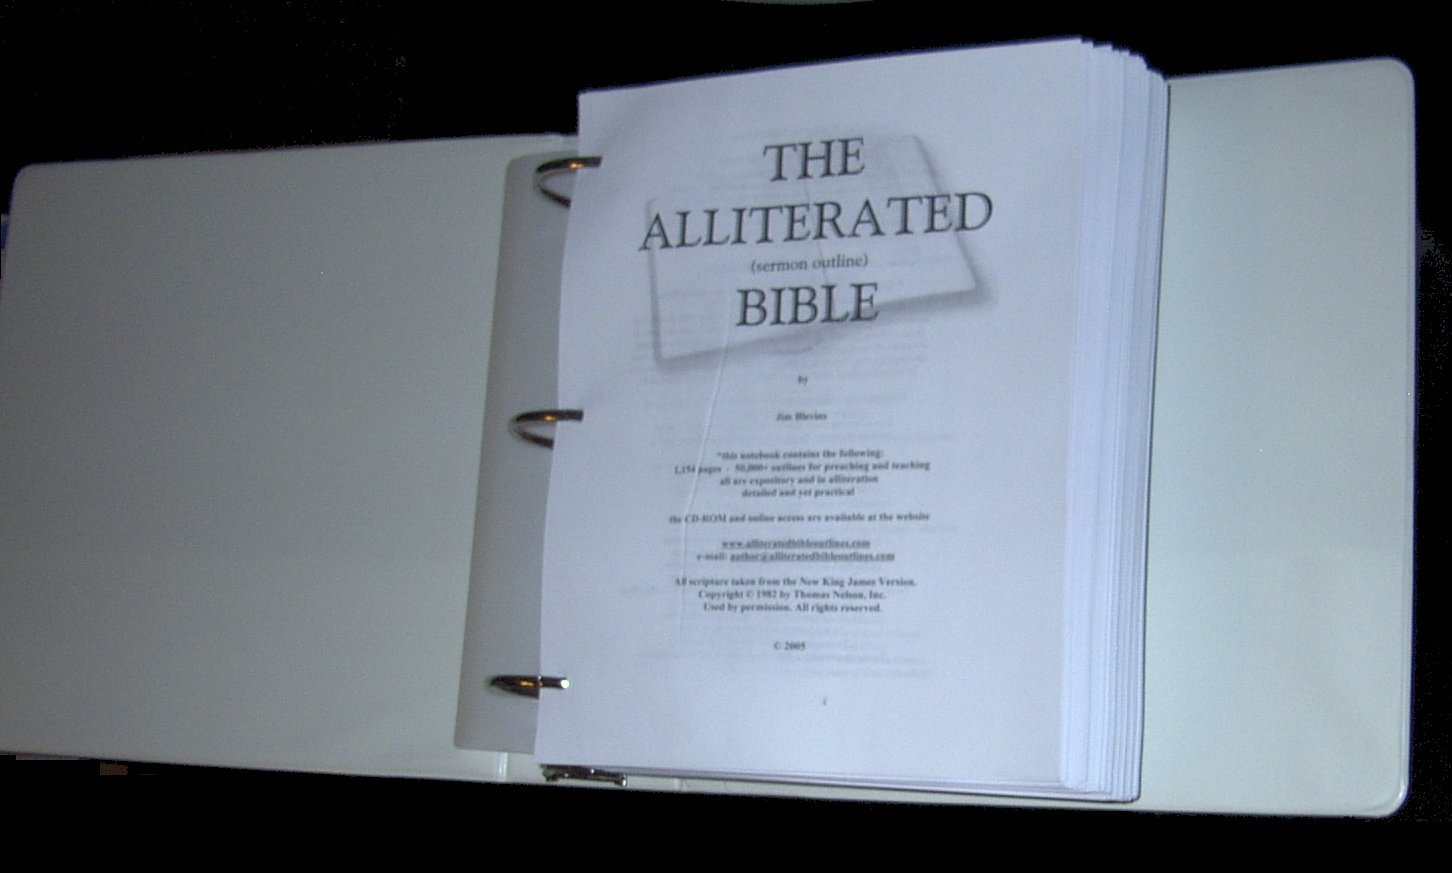 The Alliterated Sermon oOutline Bible